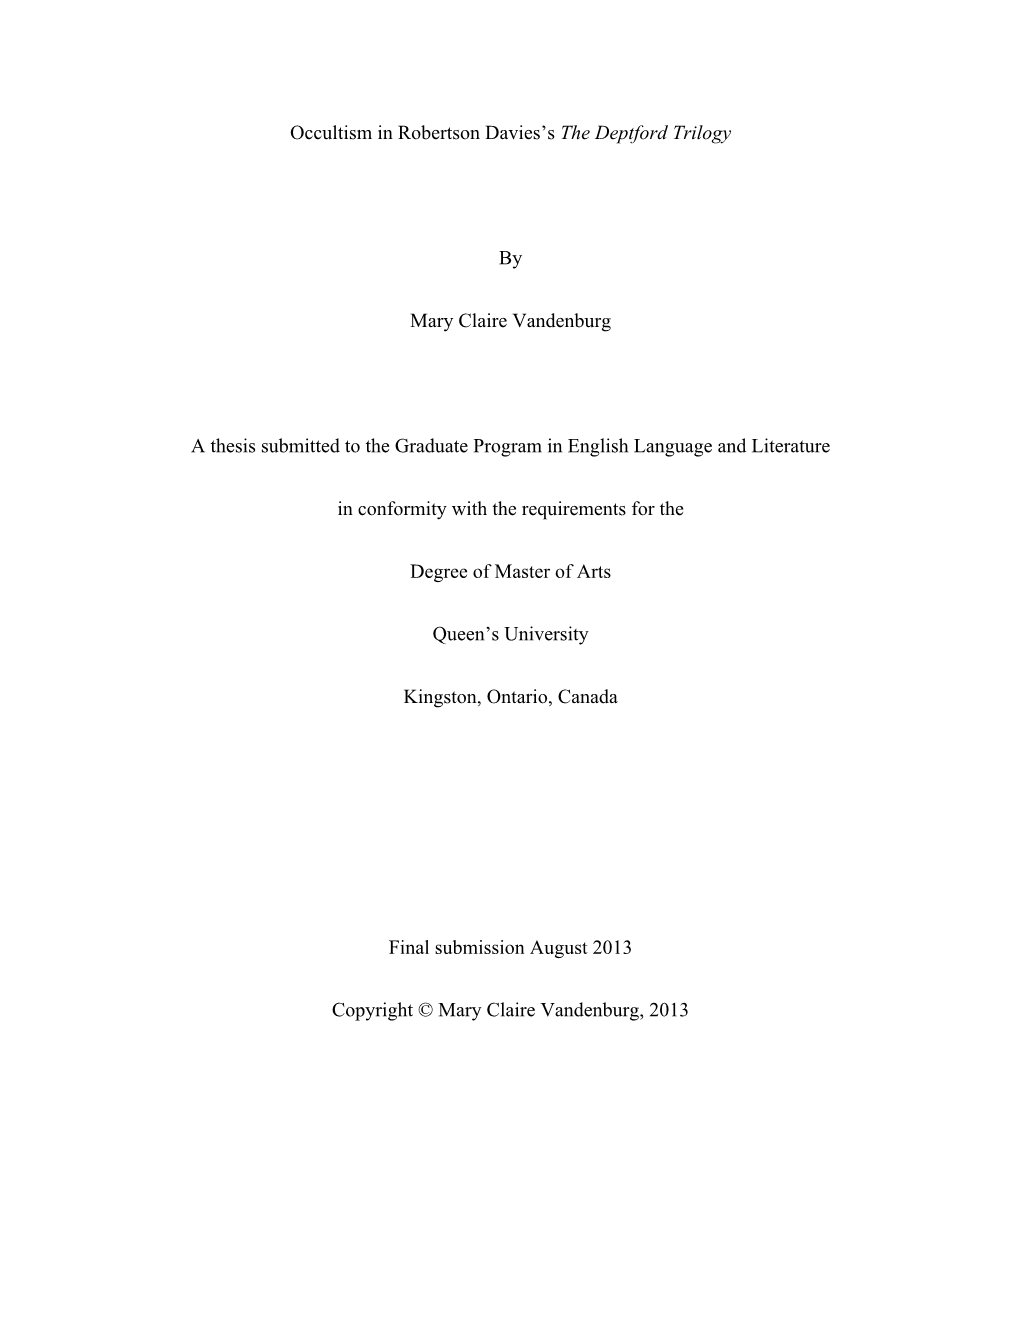 Occultism in Robertson Davies's the Deptford Trilogy by Mary Claire Vandenburg a Thesis Submitted to the Graduate Program in E